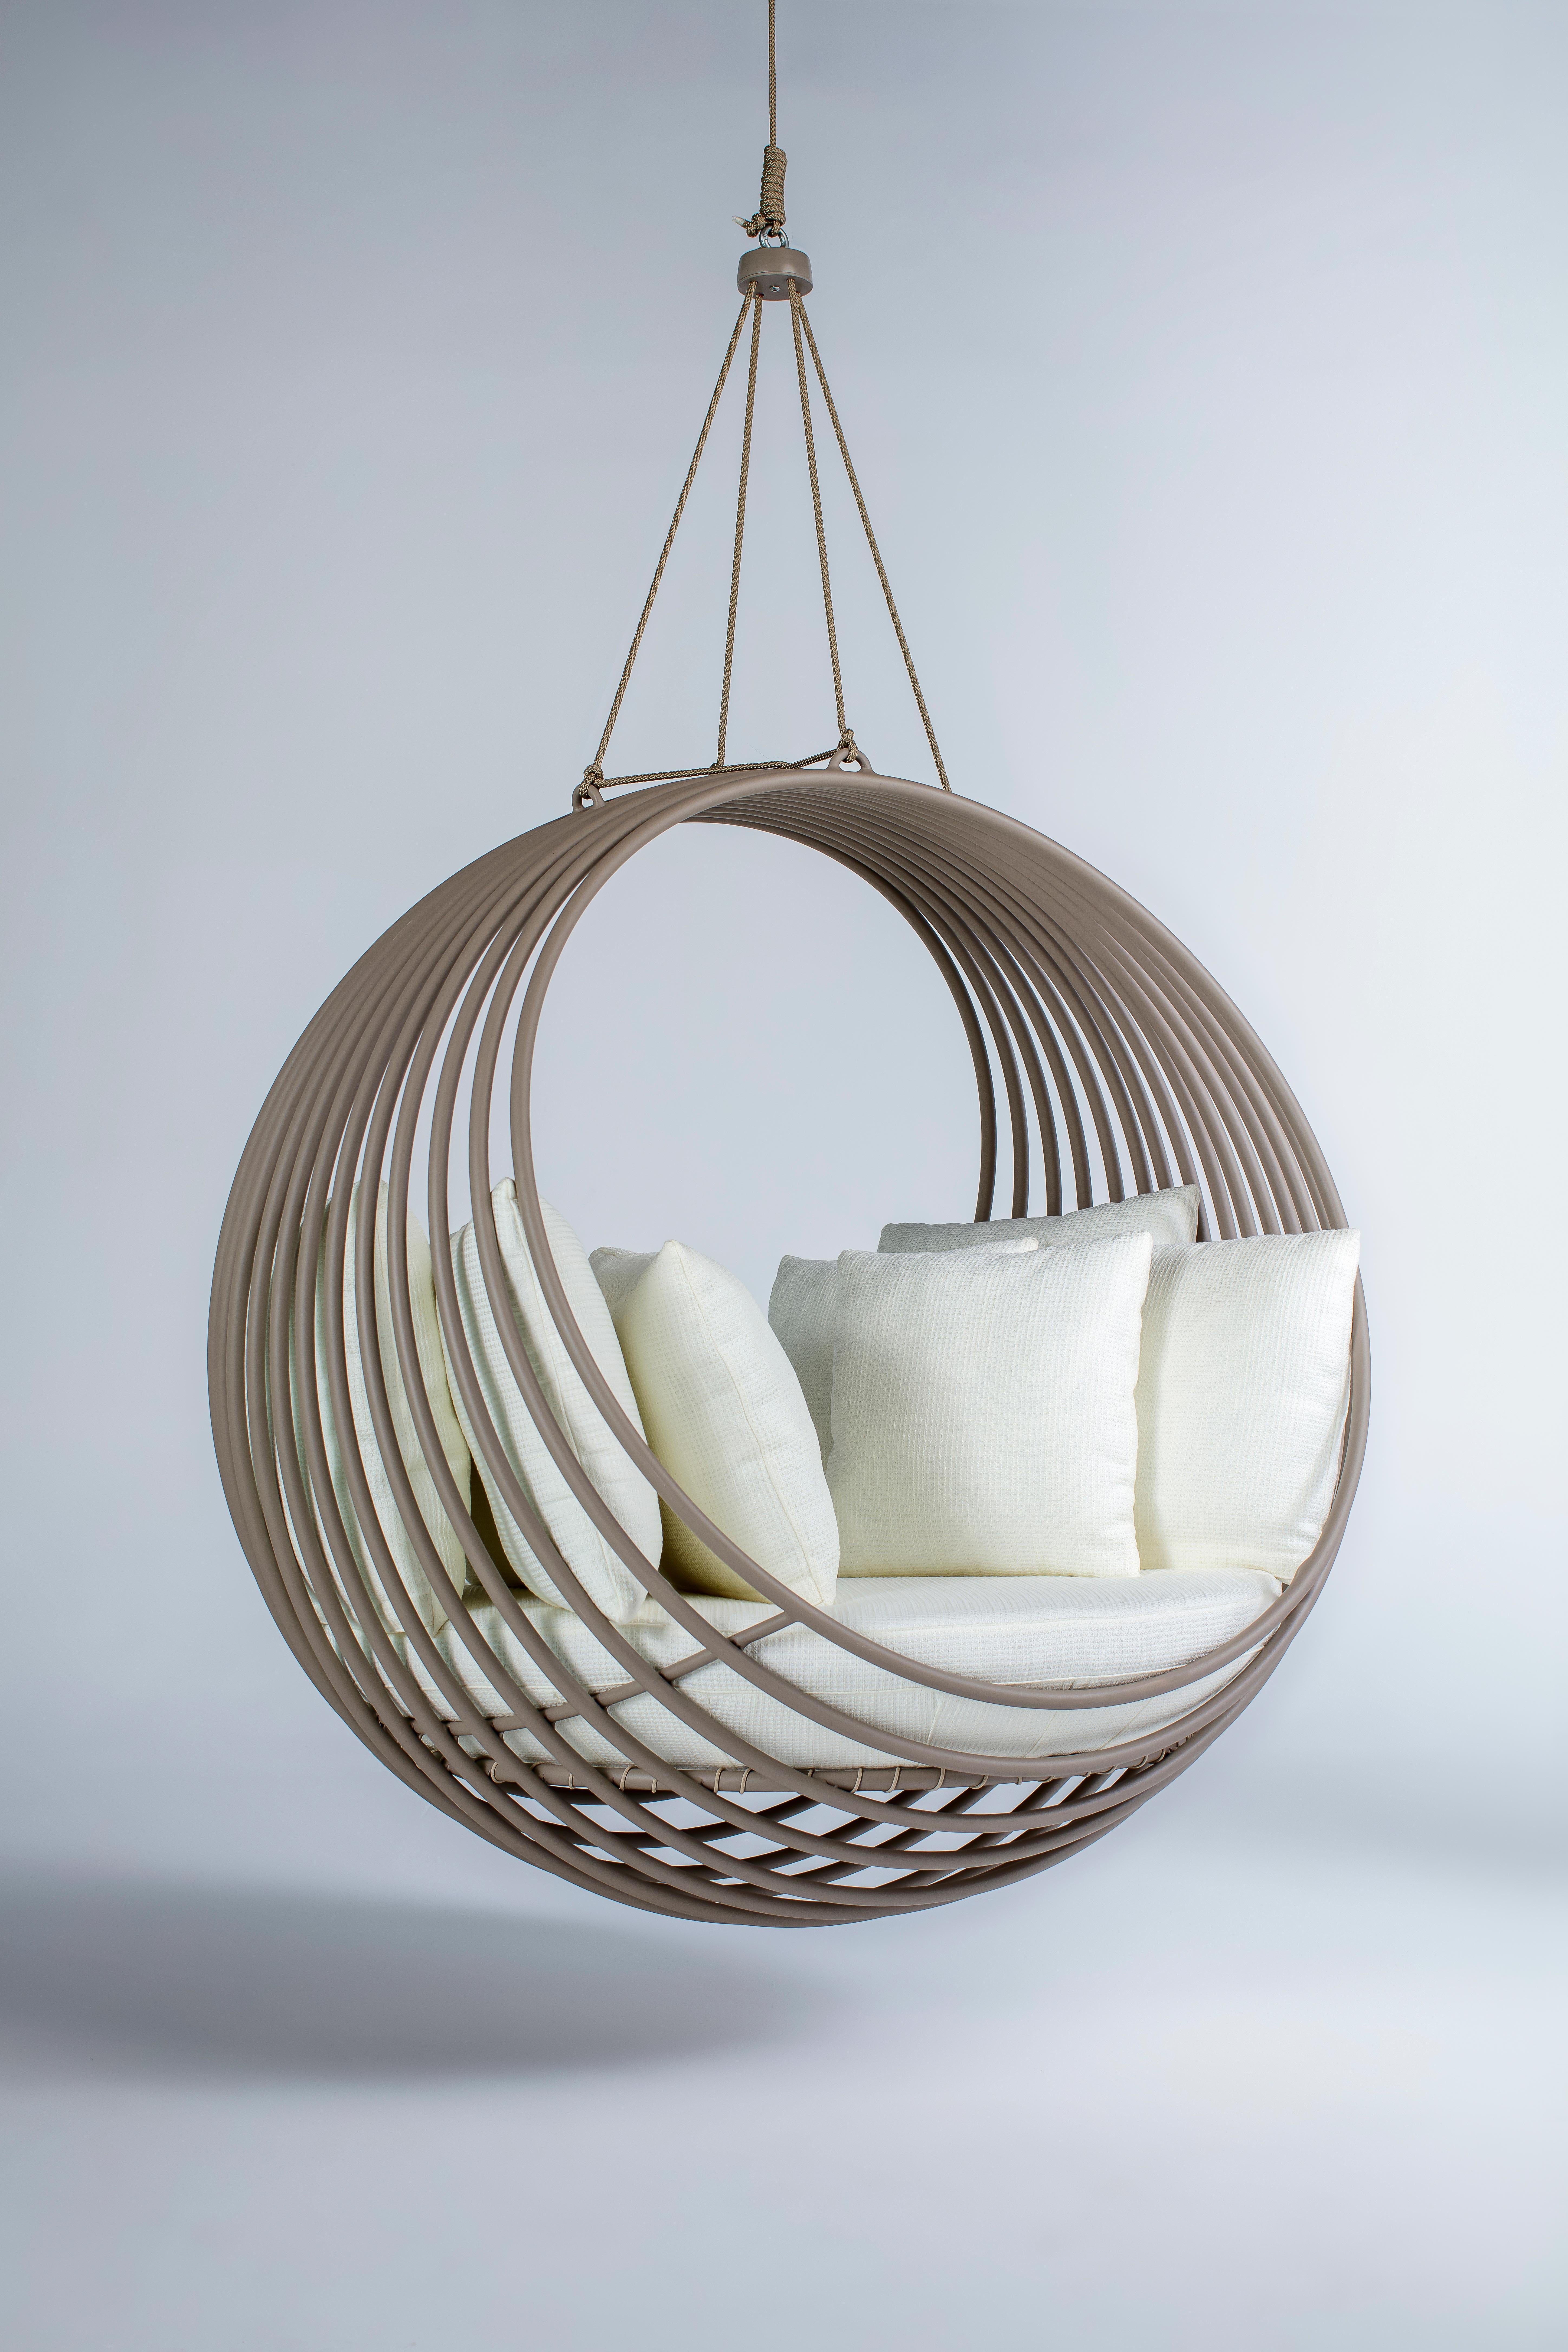 The welcoming shape retains the essence of shelter. Covered by the feeling of coziness, the design of Ubirani Swing invites you to moments of rest, relaxation and inner connection. From the circular structure forged in aluminum emanates the idea of